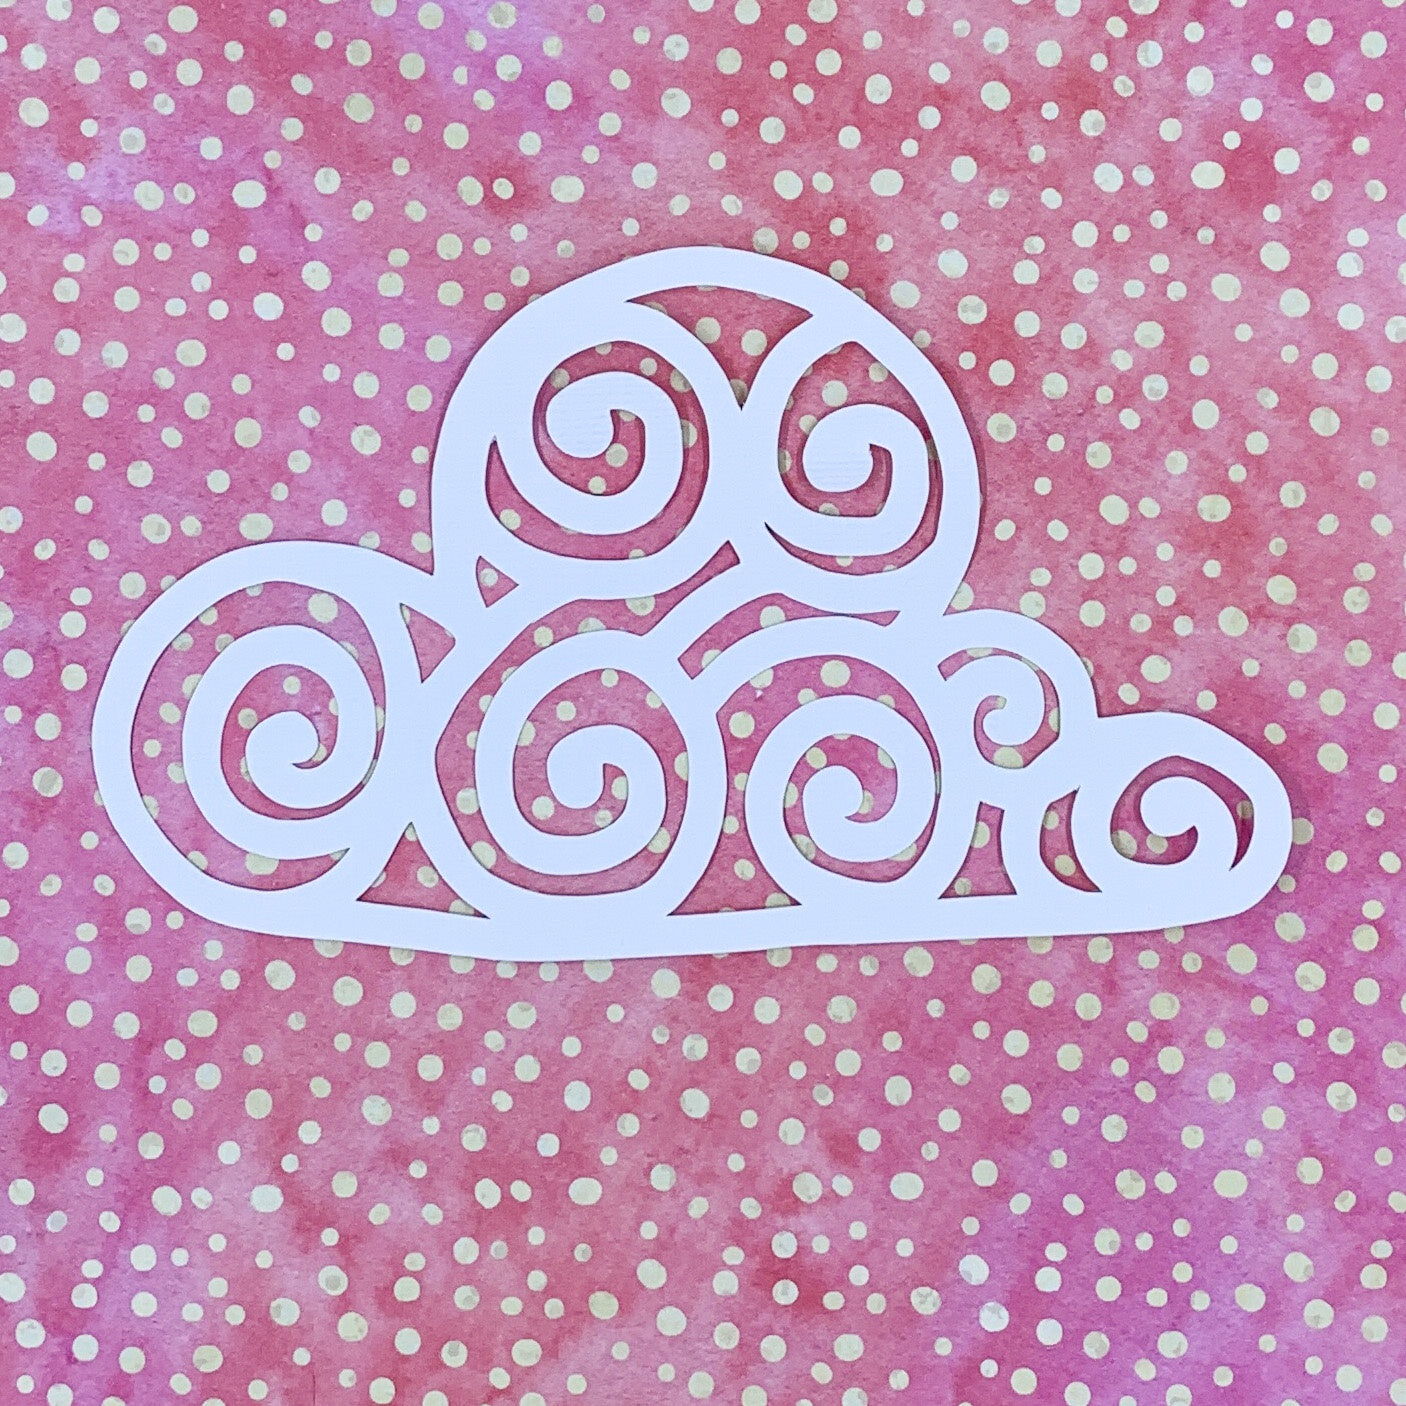 Tropicana - Curly Cloud (large) 6"x3.5" White Linen Cardstock Picture-Cut - Designed by Alicia Redshaw